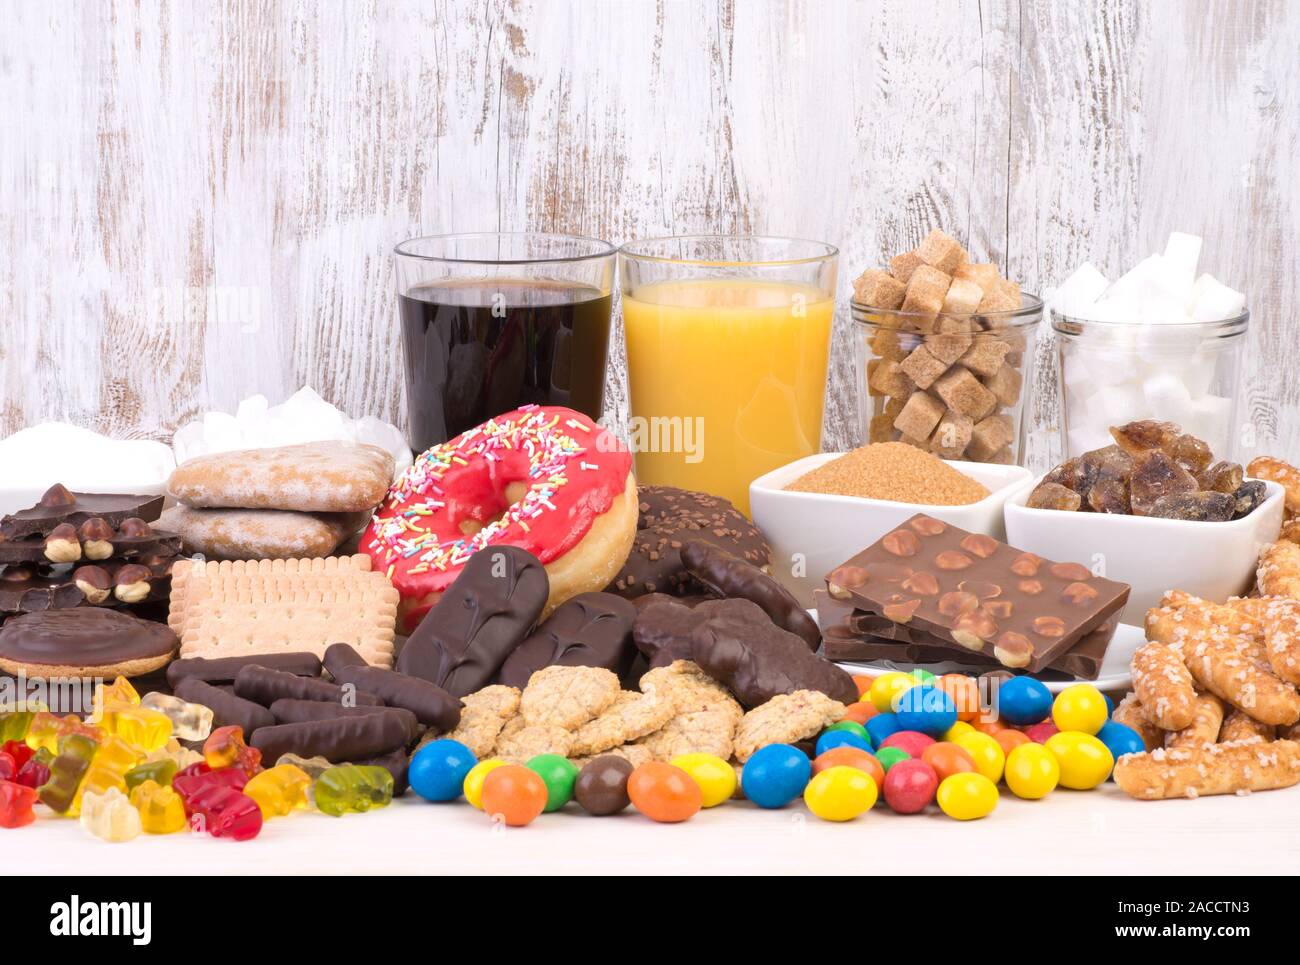 Food containing too much sugar. Sugar in diet causes obesity, diabetes and other health problems Stock Photo